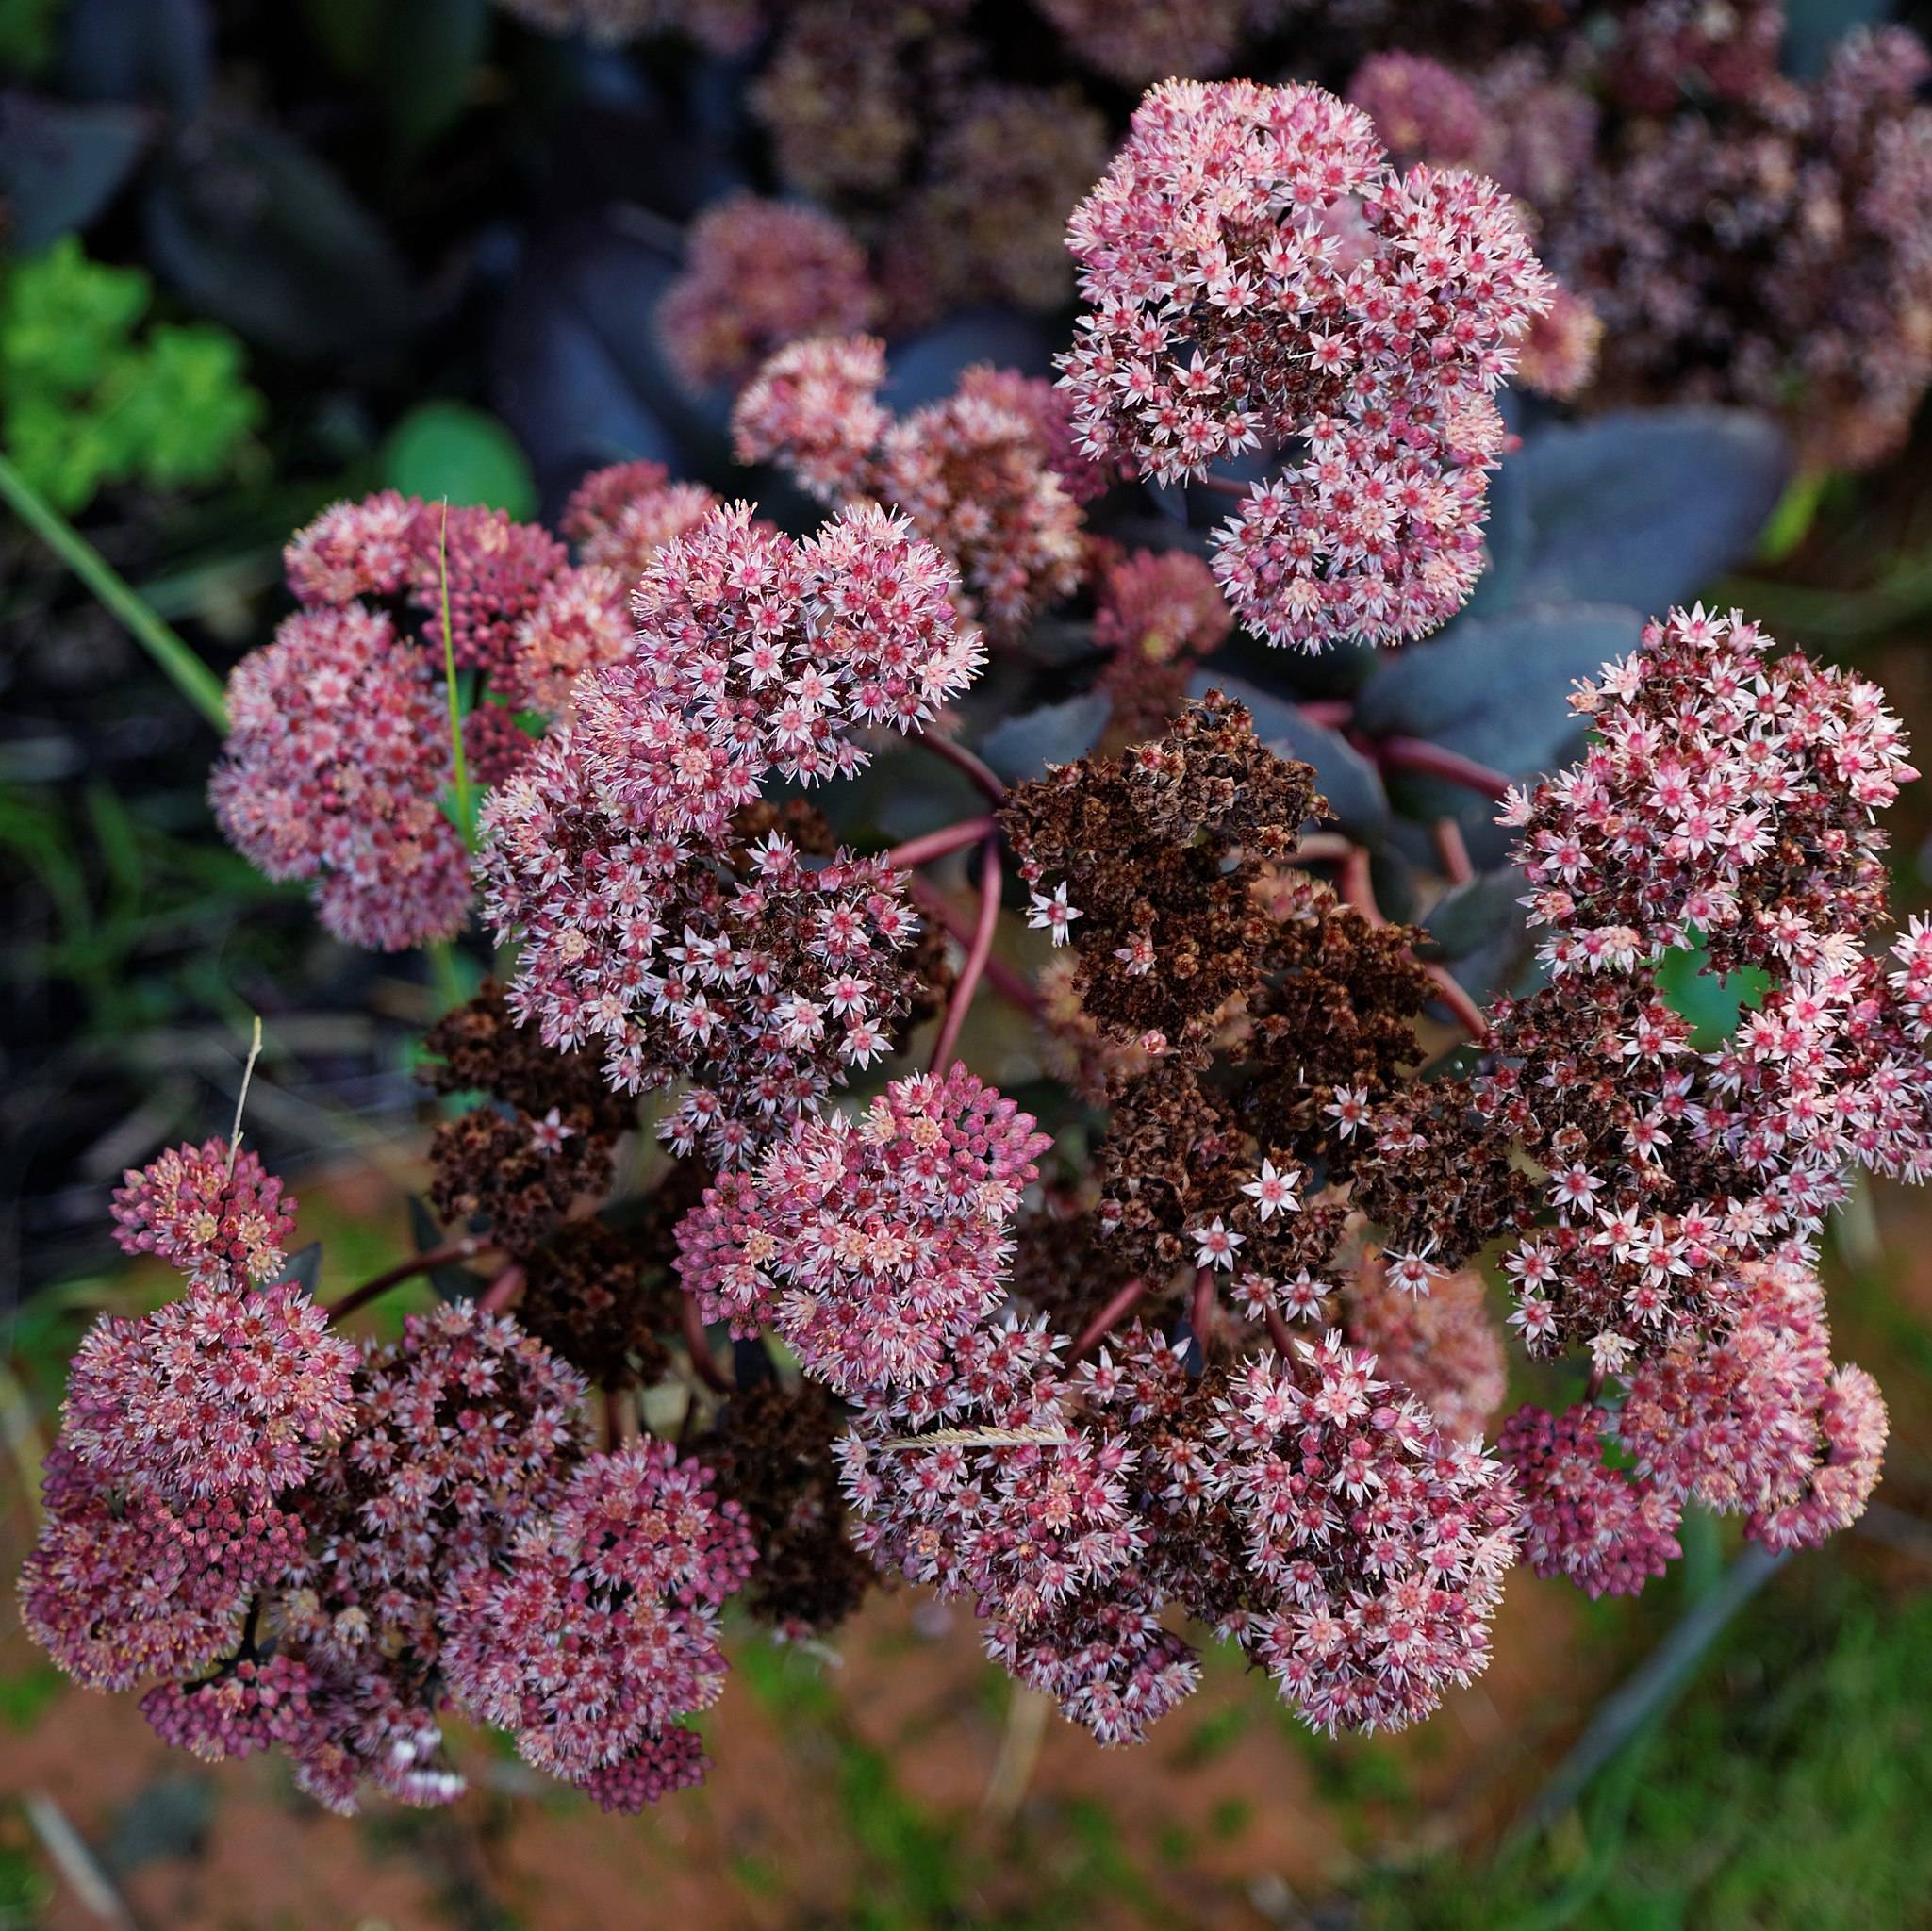 pink-brown flowers with burgundy stems and green leaves